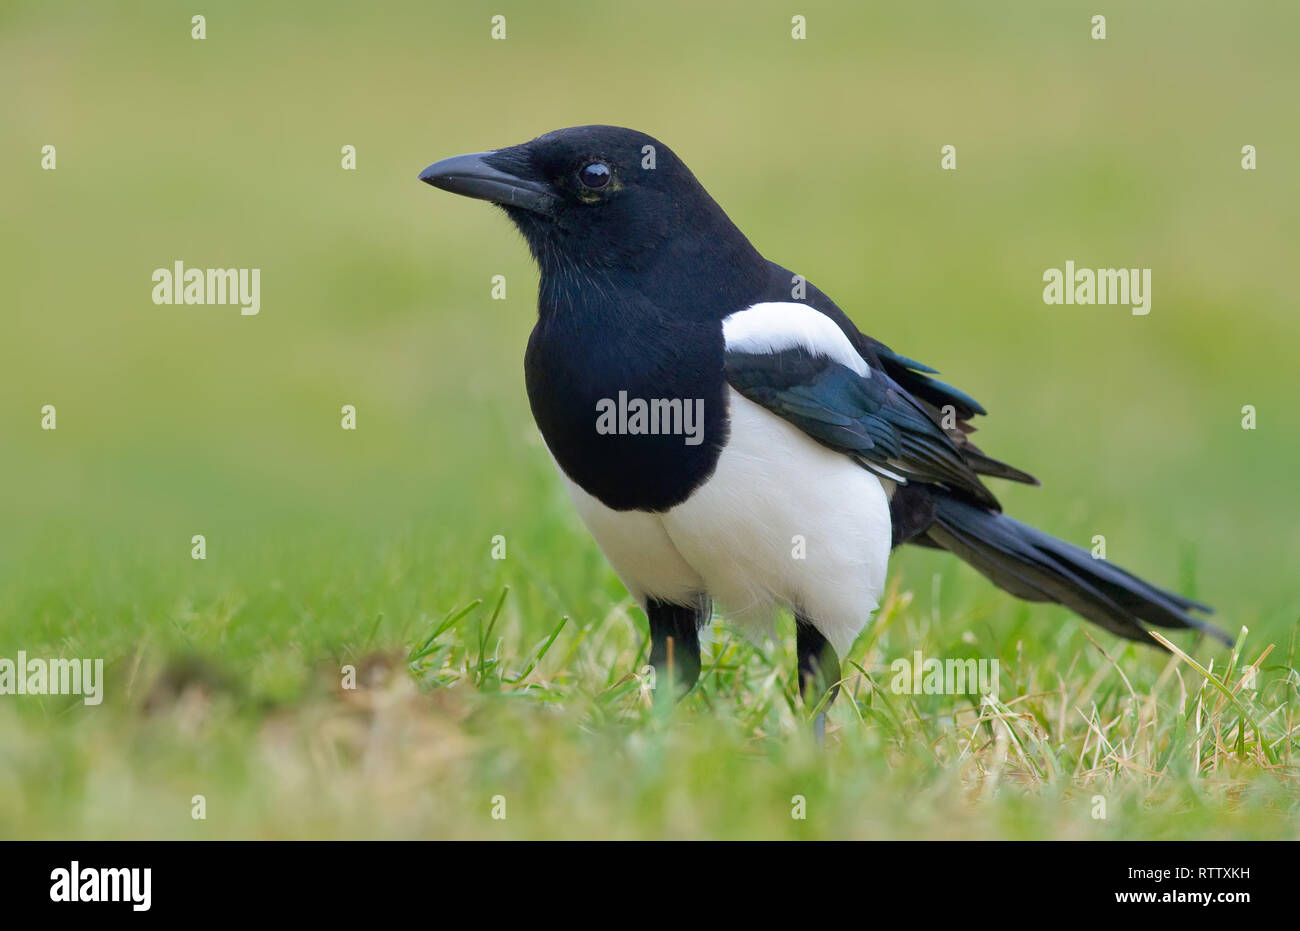 Eurasian magpie stands in the green grass cover Stock Photo